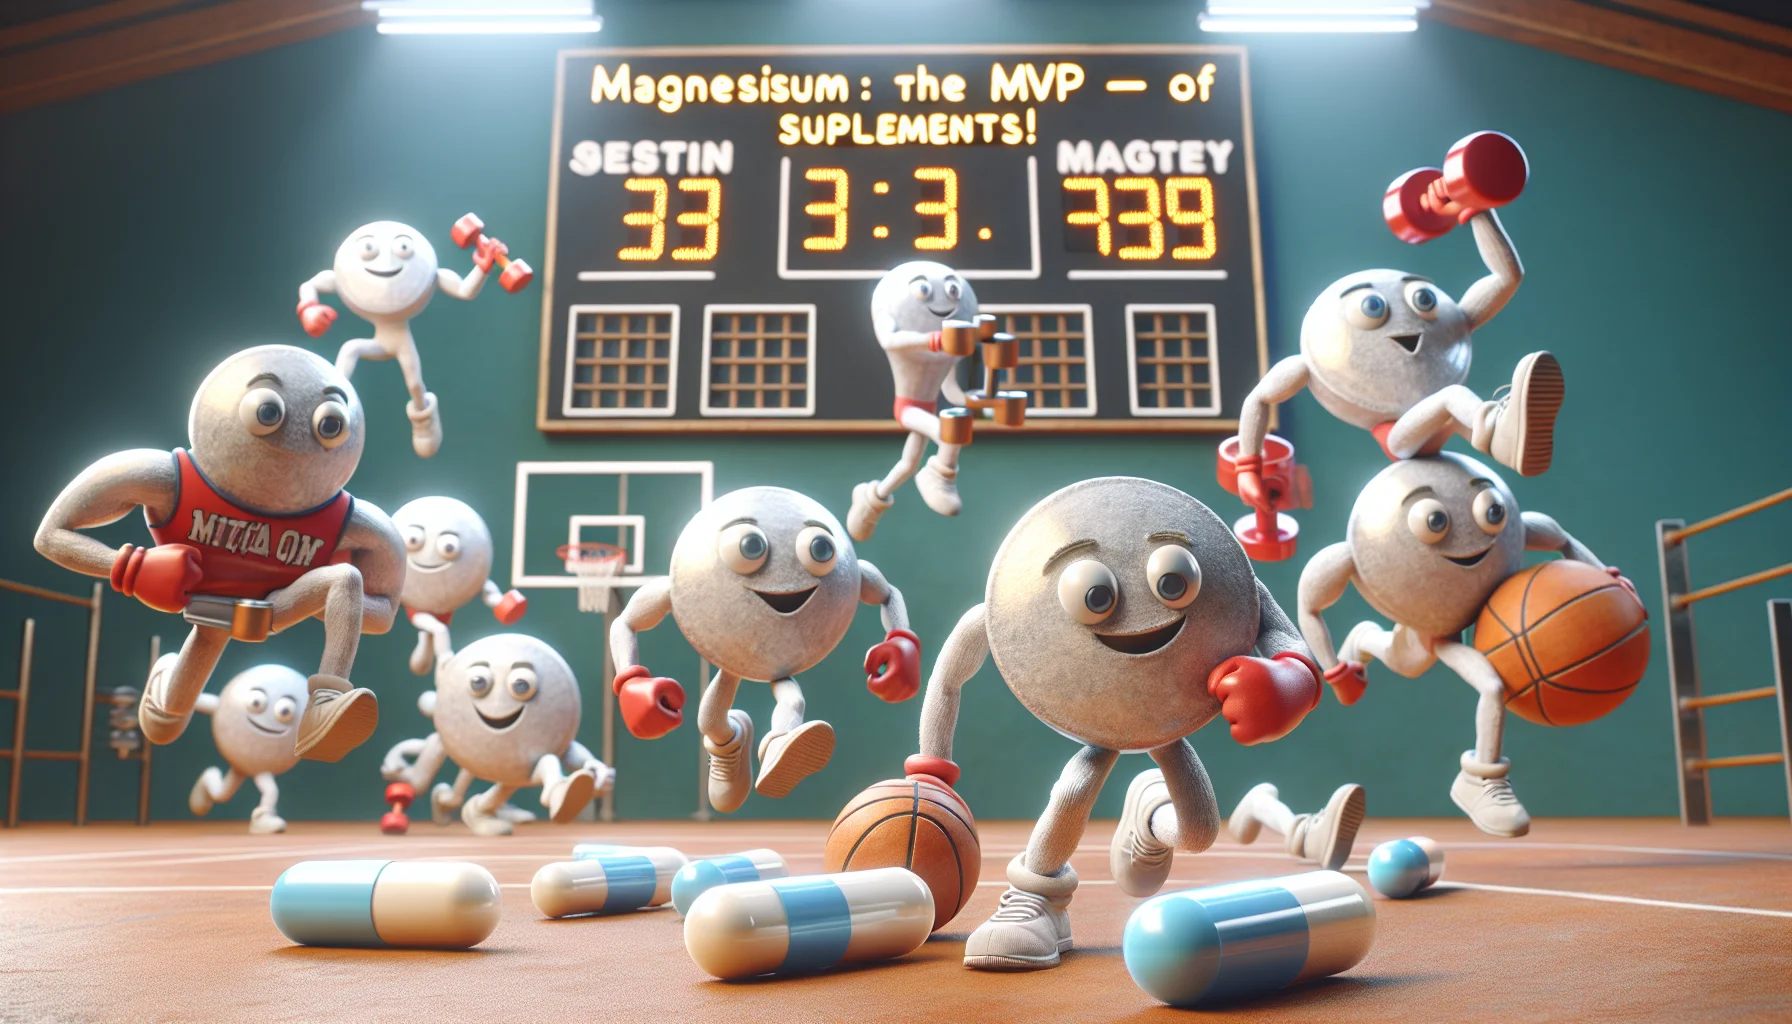 Render a humorous scenario where magnesium turnings are animated with anthropomorphic features, illustrating an act of playing various sports. They are shown running, lifting weights, and even cheering. On one side, a scoreboard displays 'Magnesium: The MVP of Supplements!'. The background resembles a lively gym setting with small doses of magnesium supplements strategically placed around the scene. The image is realistic and, in an amusing way, emphasizes the importance of magnesium in sports nutrition.